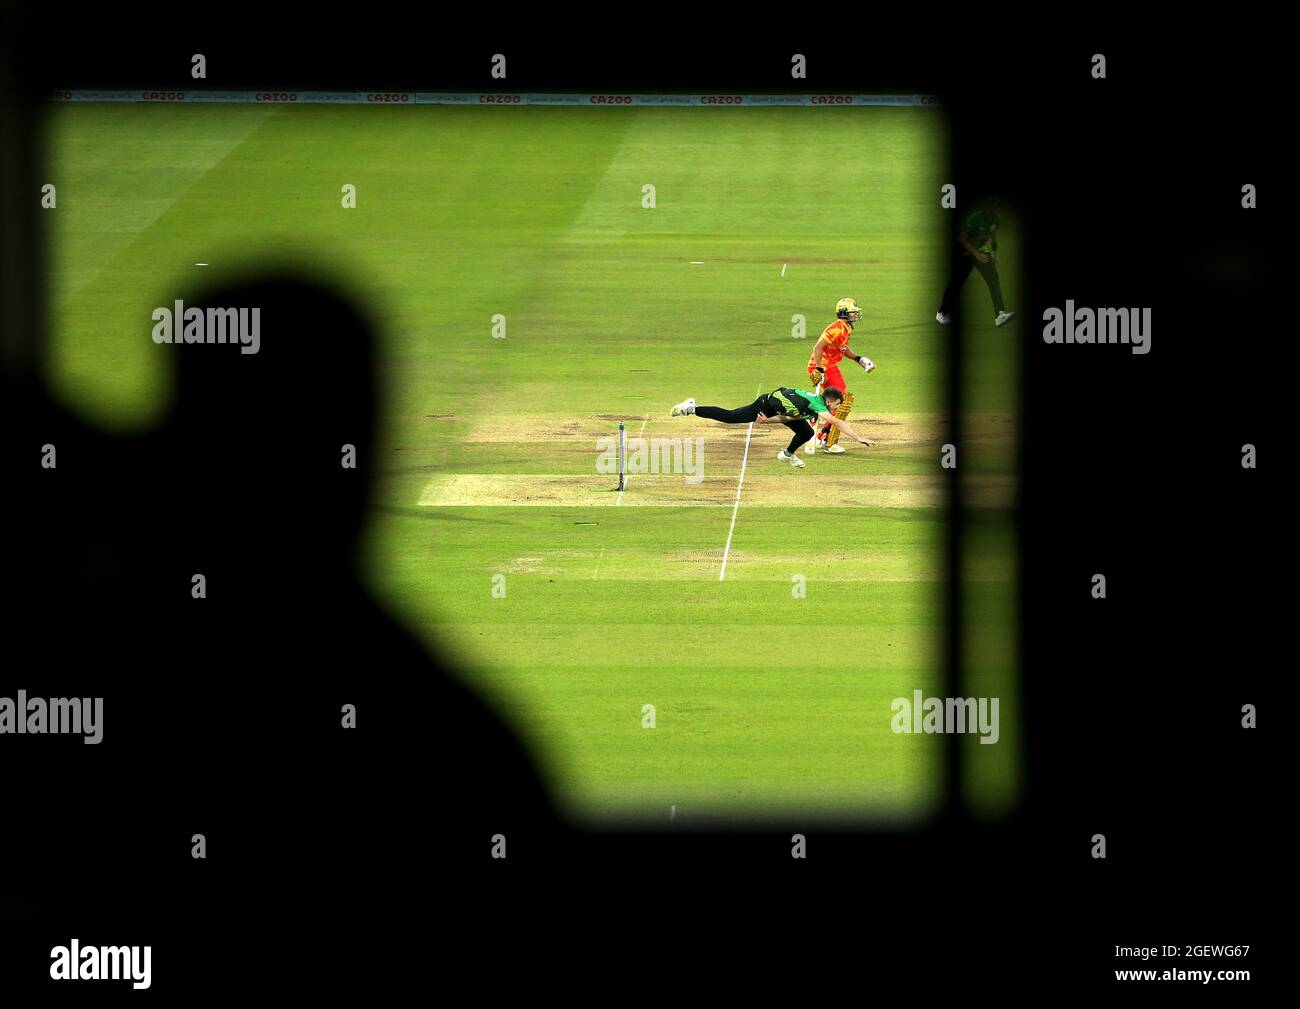 Southern Brave's Craig Overton bowling during the Men's Final of The Hundred at Lord's, London. Picture date: Saturday August 21, 2021. See PA story CRICKET Hundred. Photo credit should read: Steven Paston/PA Wire. RESTRICTIONS: Editorial use only. No commercial use without prior written consent of the ECB. Still image use only. No moving images to emulate broadcast. No removing or obscuring of sponsor logos. Stock Photo